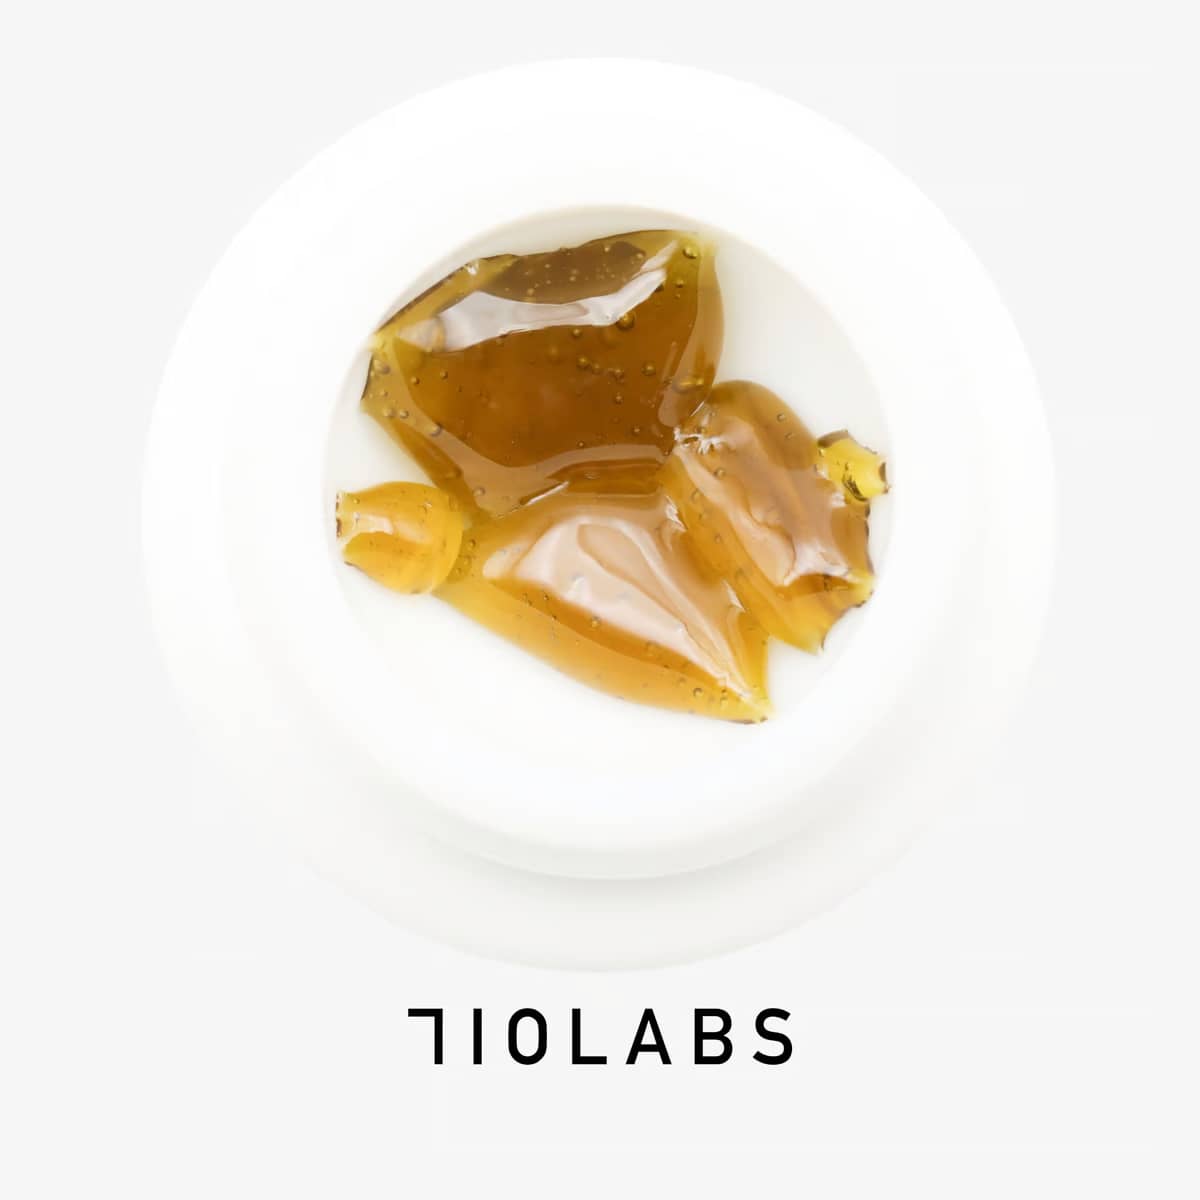 Garlic Cocktail #7 Rosin | Unique Cannabis Extract | Intense Flavor and Potency